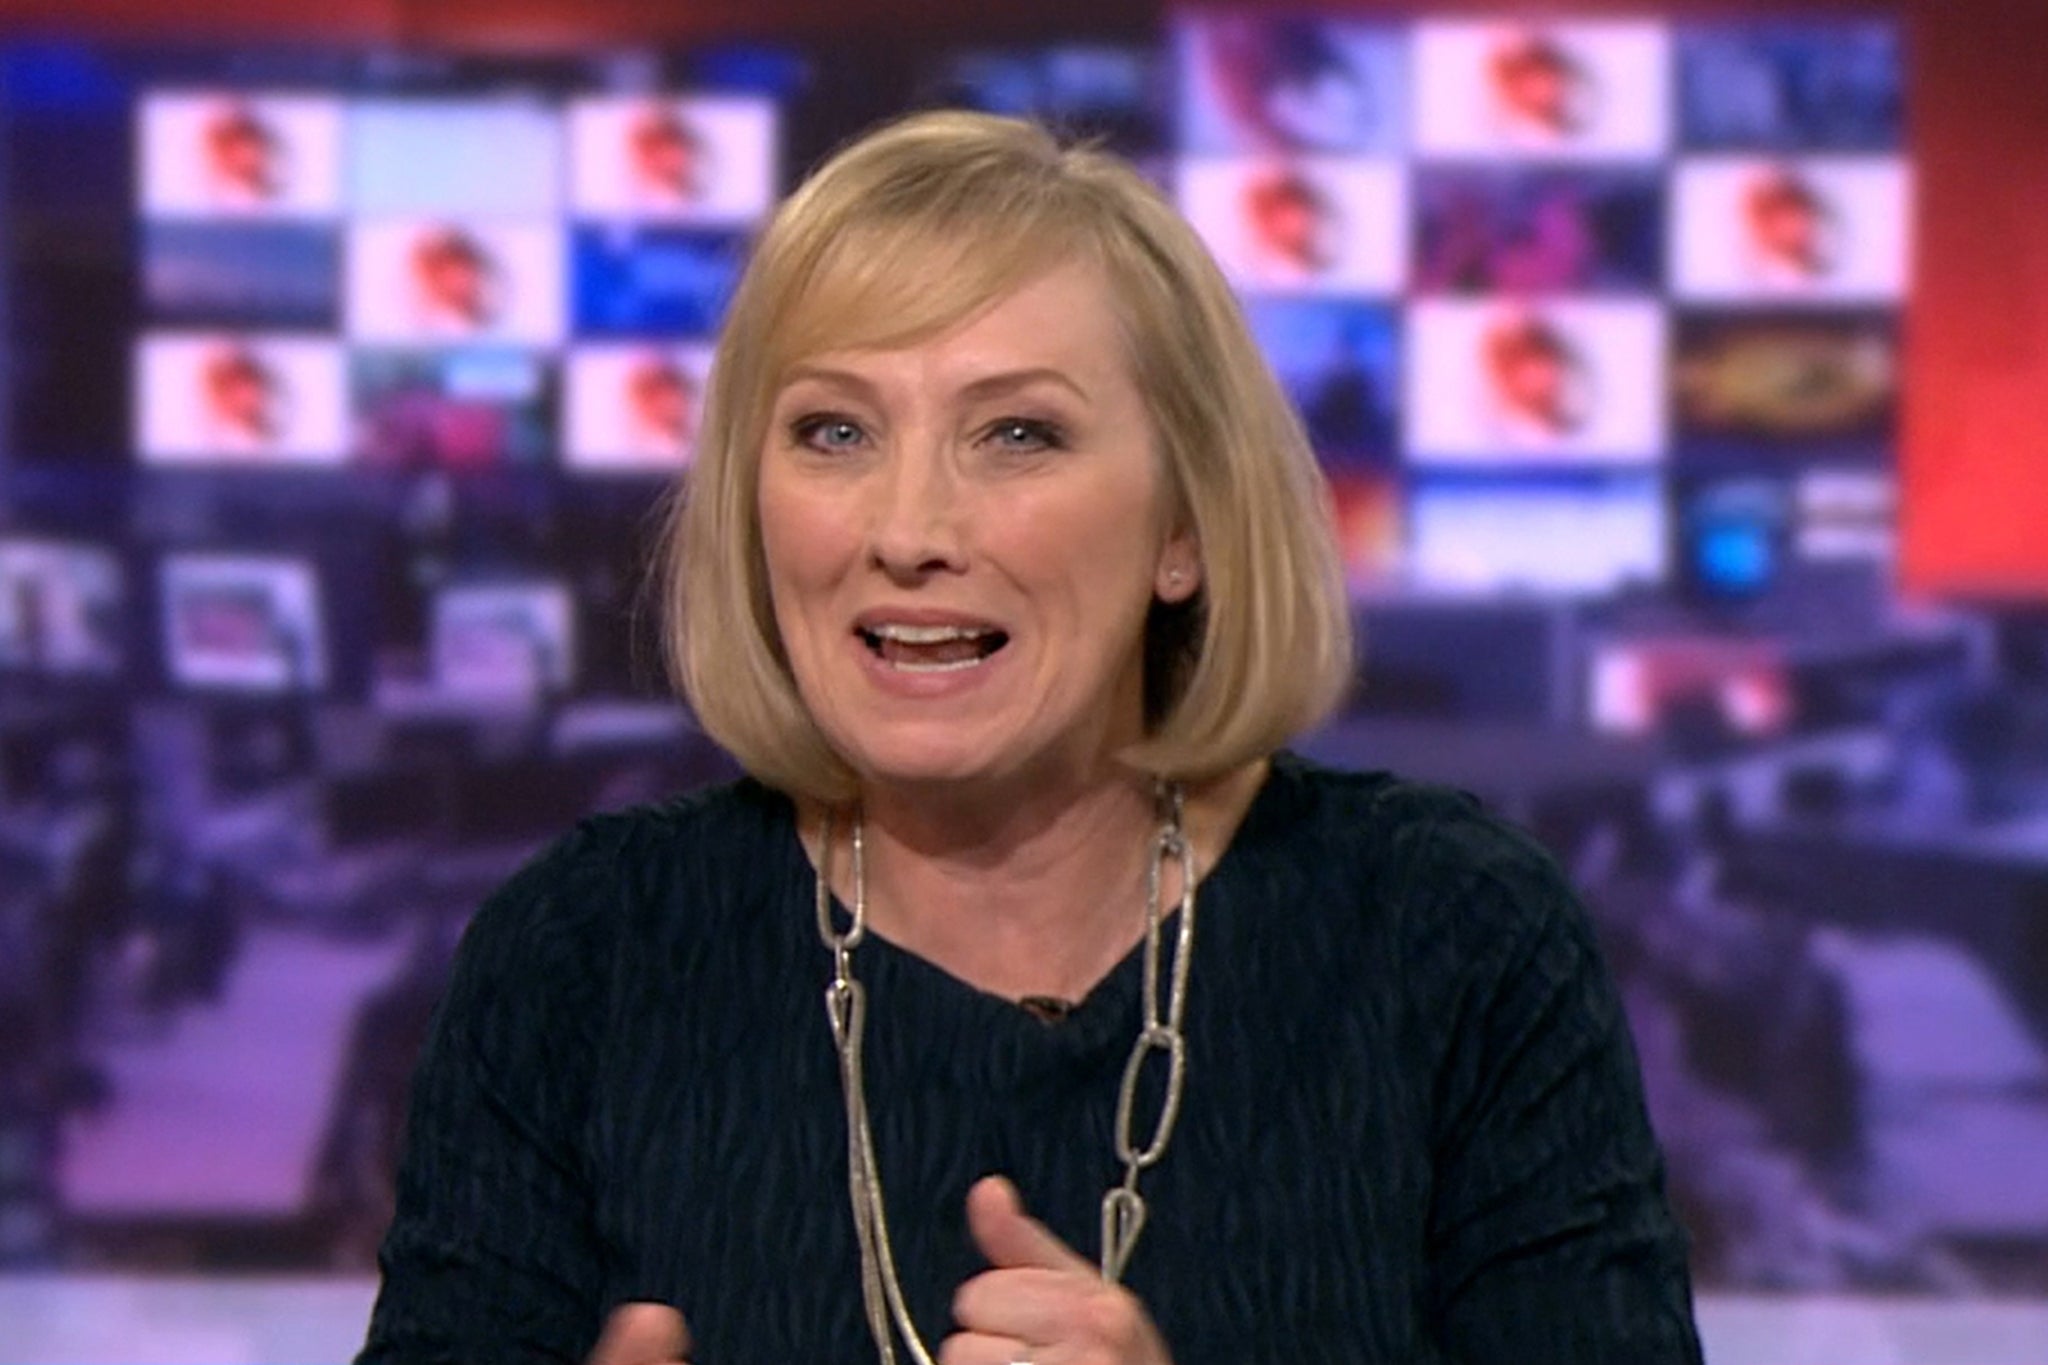 Martine Croxall is one of four journalists bringing legal action against the BBC